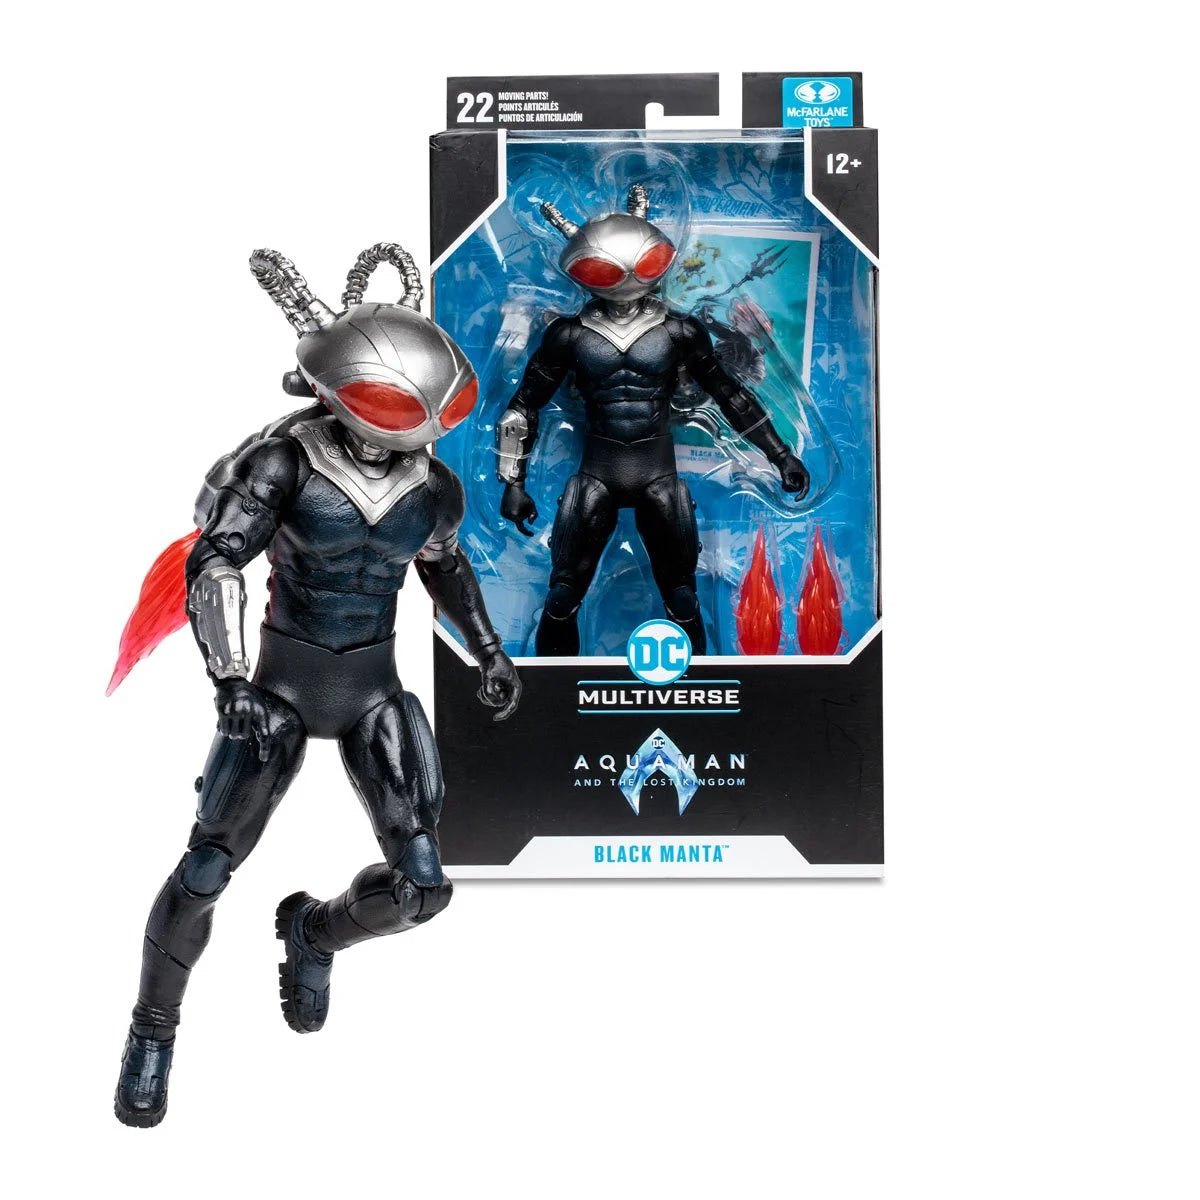 DC Multiverse Aquaman and the Lost Kingdom Movie Black Manta 7-Inch Scale Action Figure - Heretoserveyou